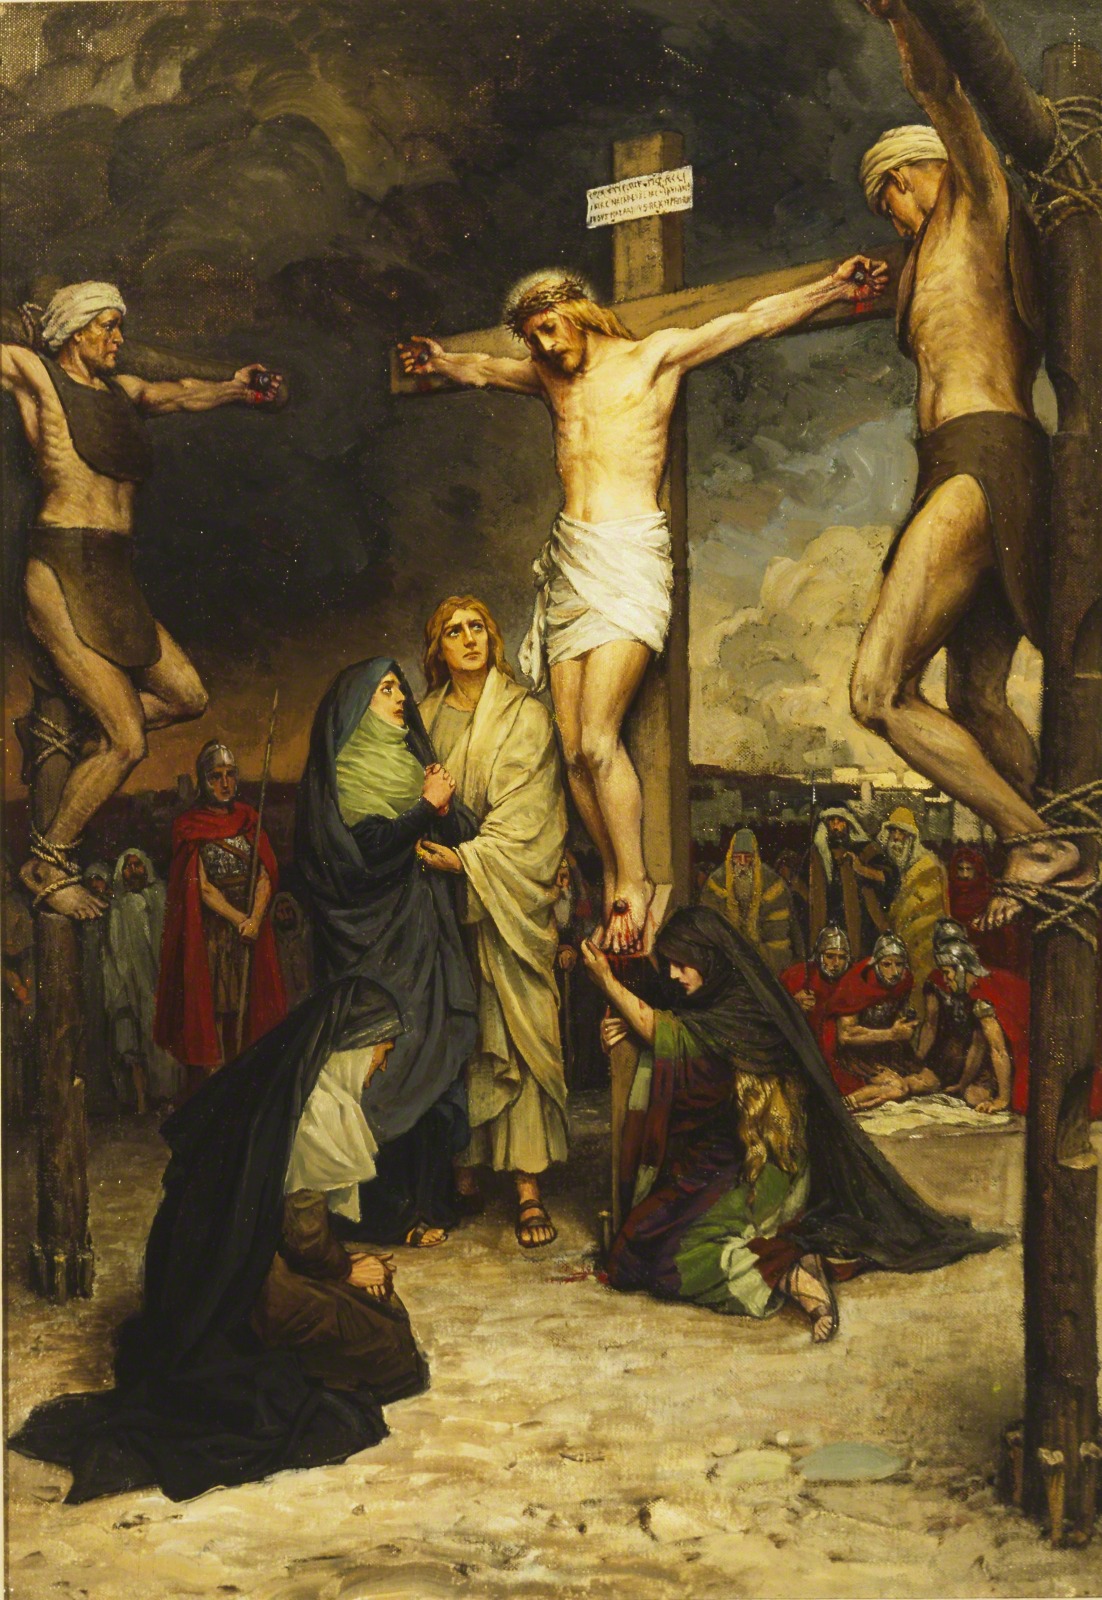 the crucifixion and resurrection of jesus christ